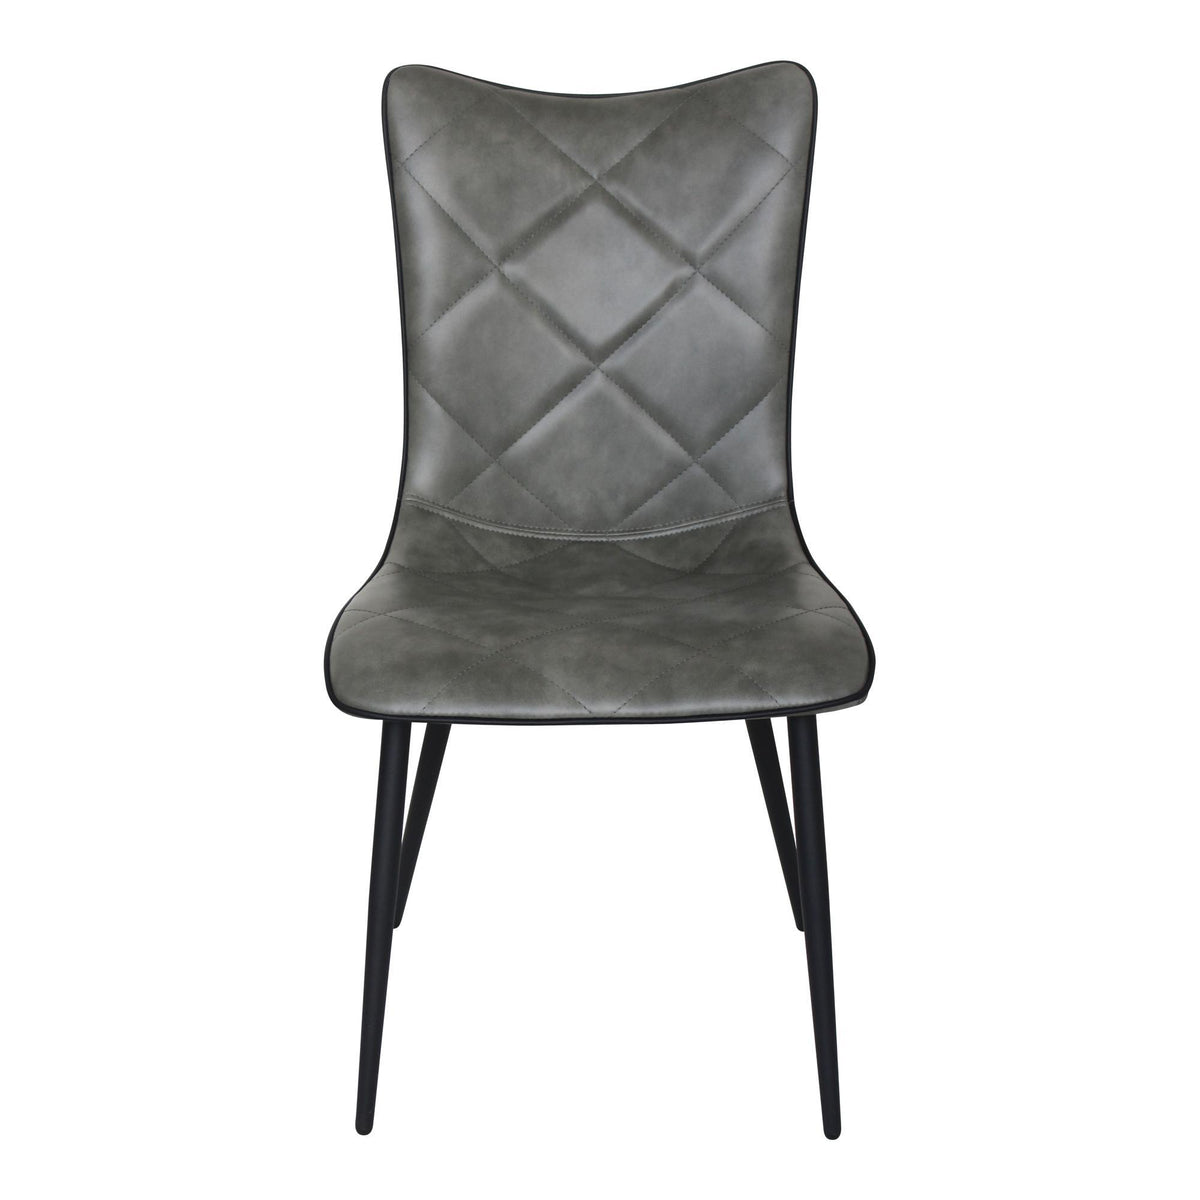 Moe's Home Collection Josie Dining Chair Grey-M2 - UU-1008-25